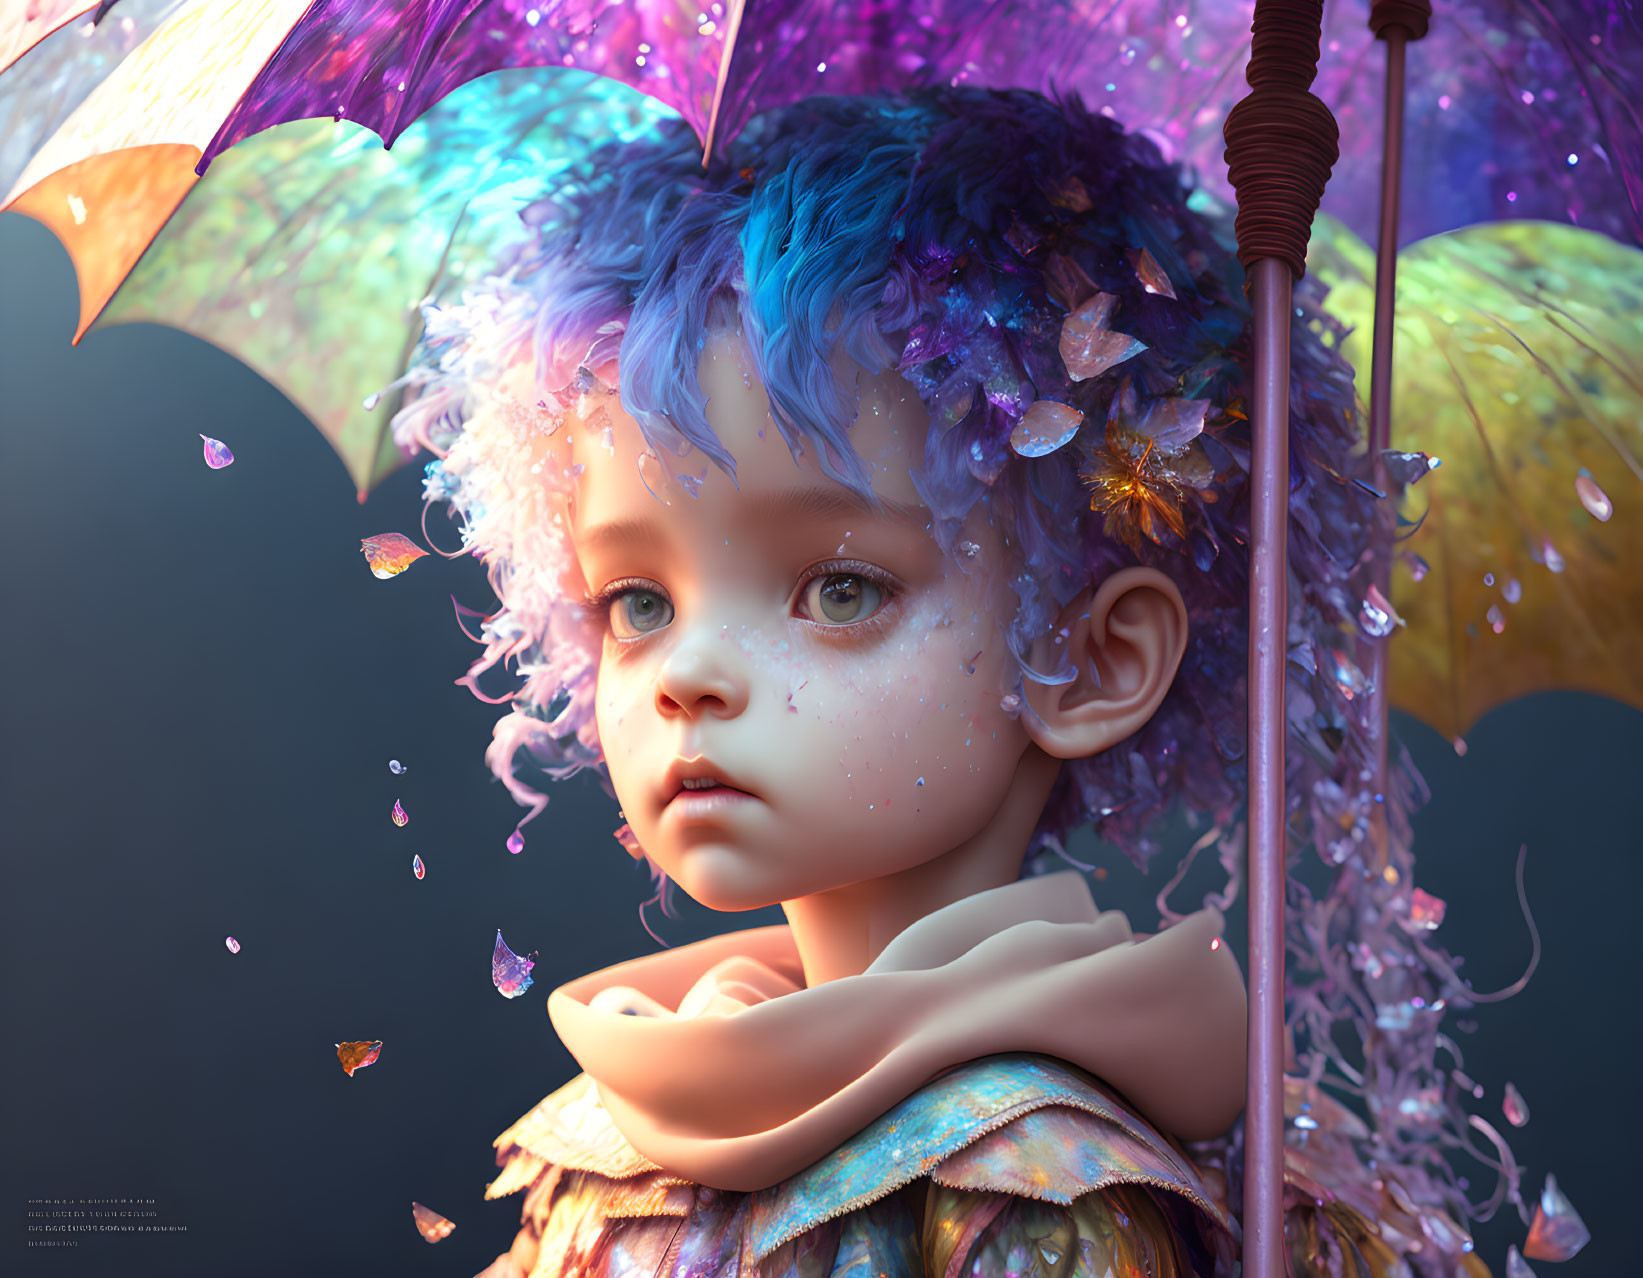 Child with Blue-Purple Hair Holding Umbrella Surrounded by Glowing Butterflies